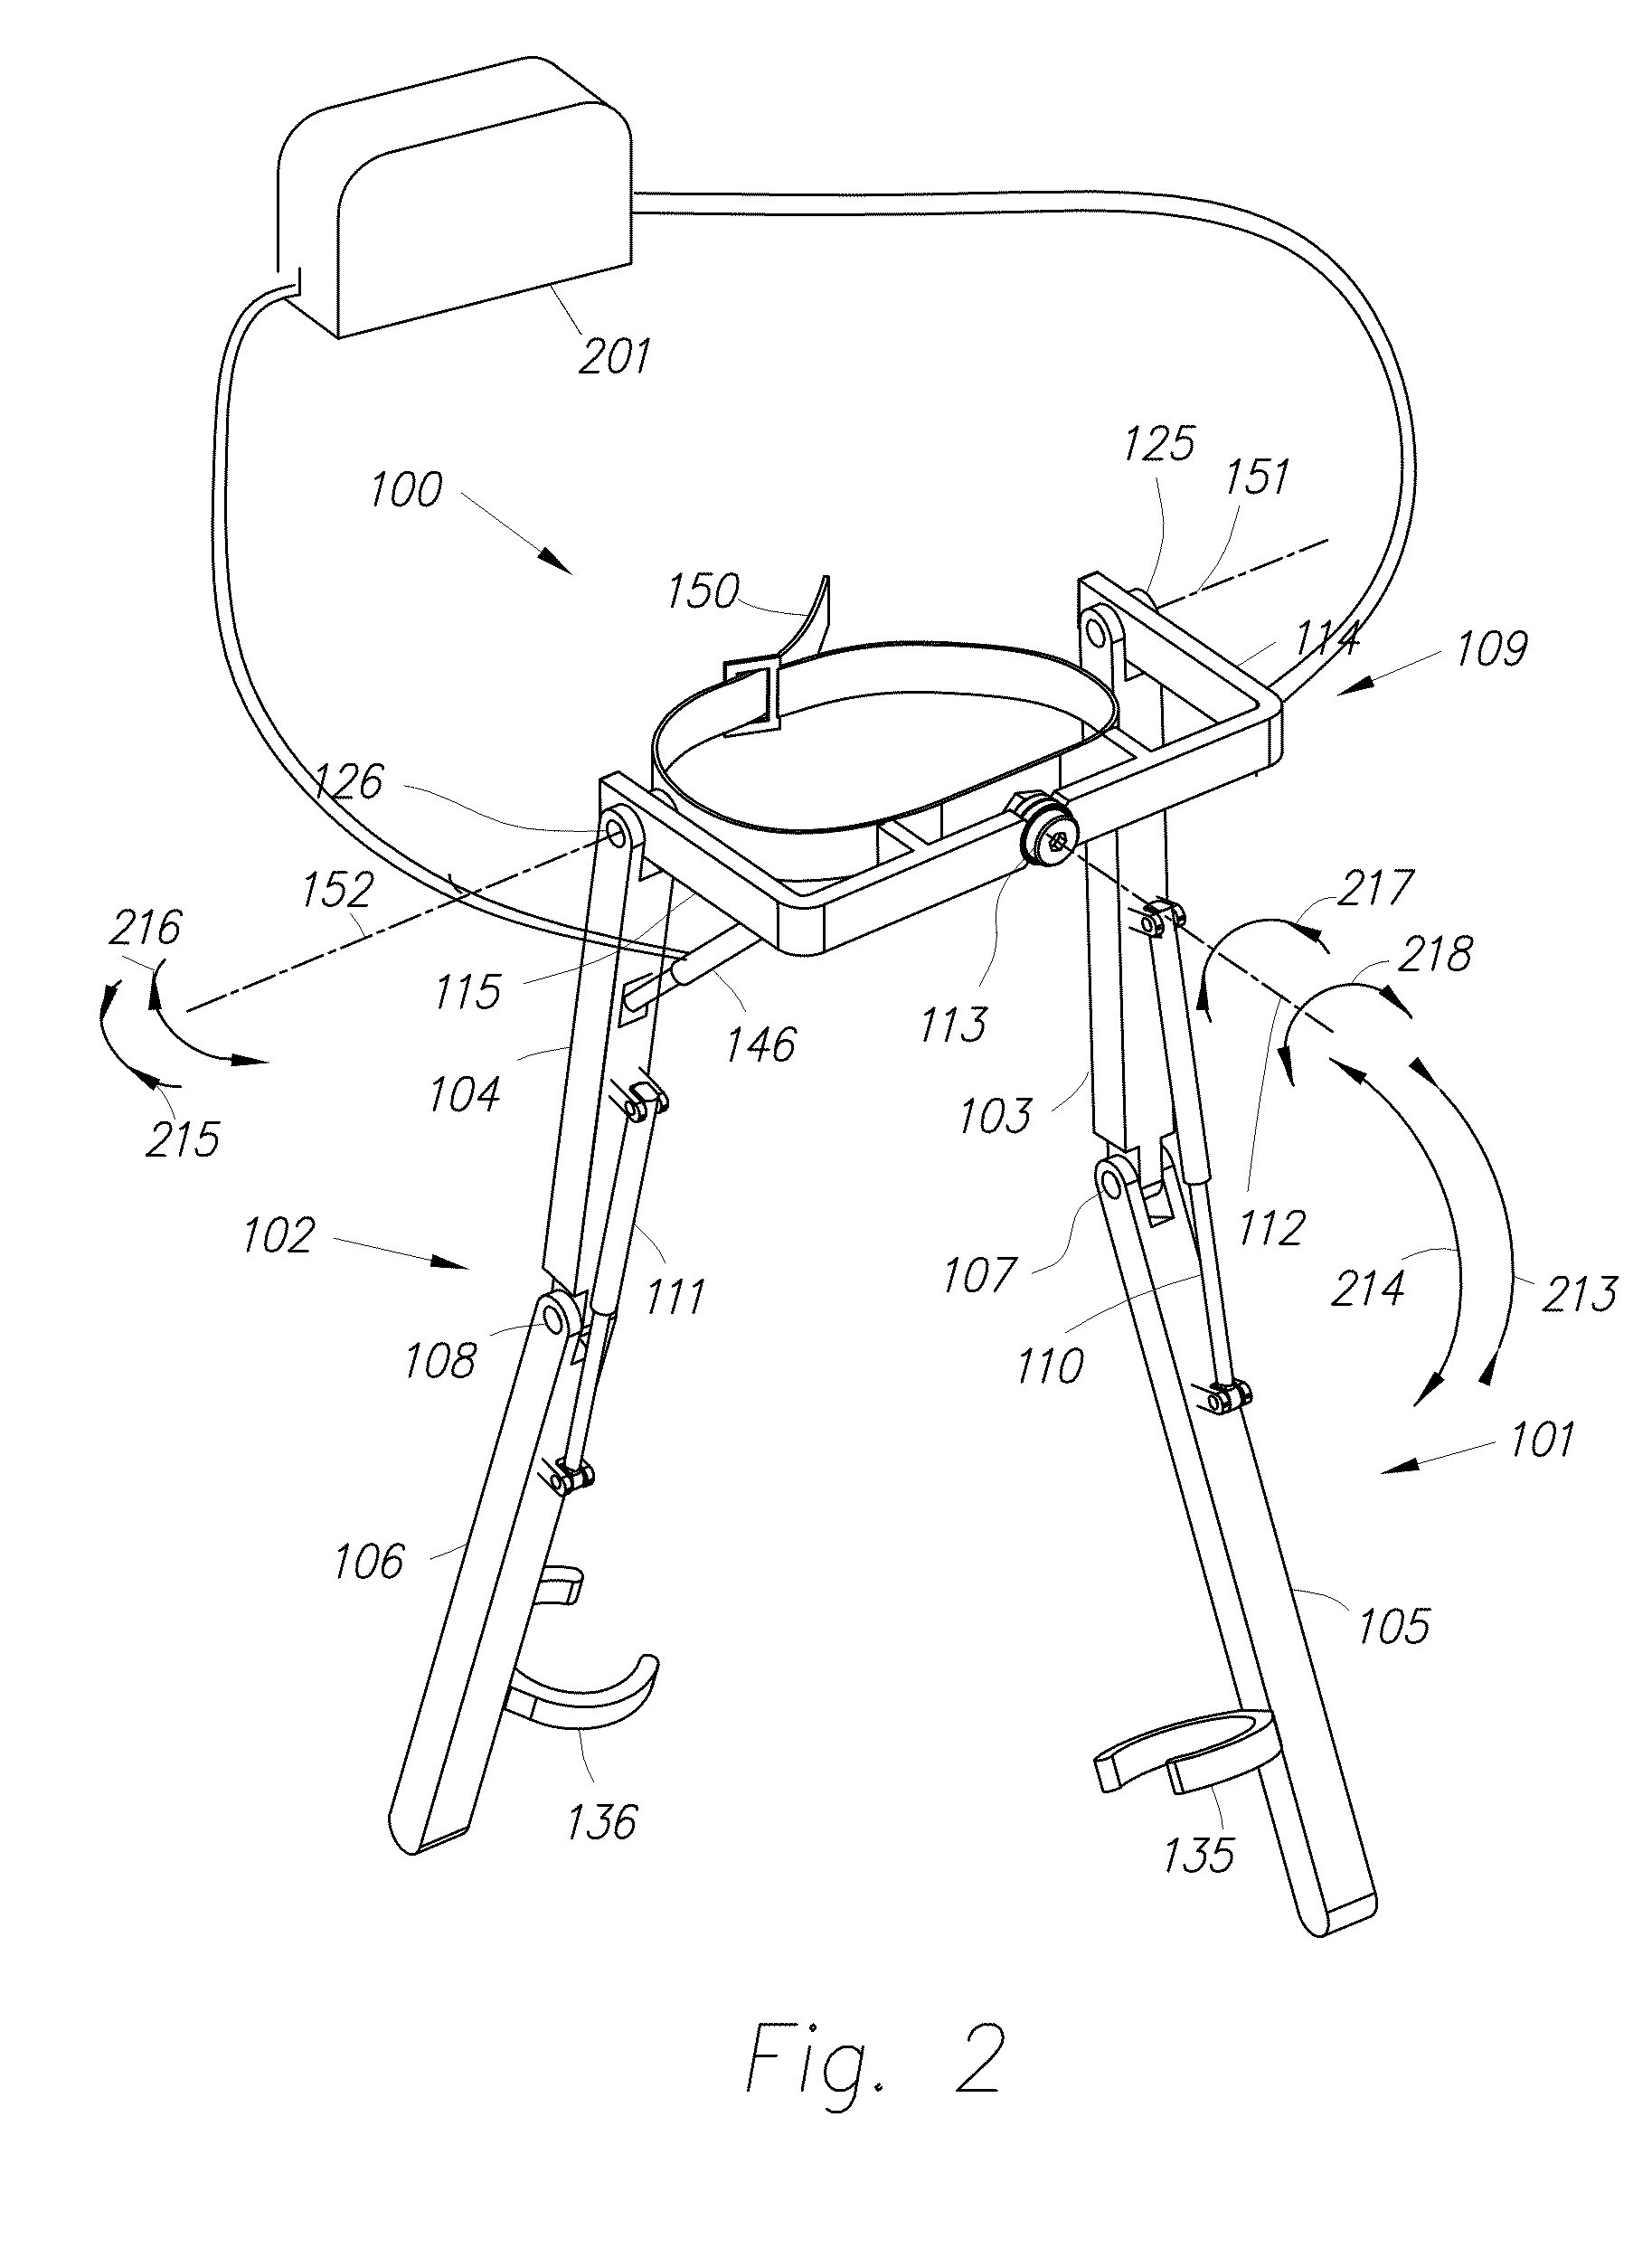 Device and method for decreasing oxygen consumption of a person during steady walking by use of a load-carrying exoskeleton